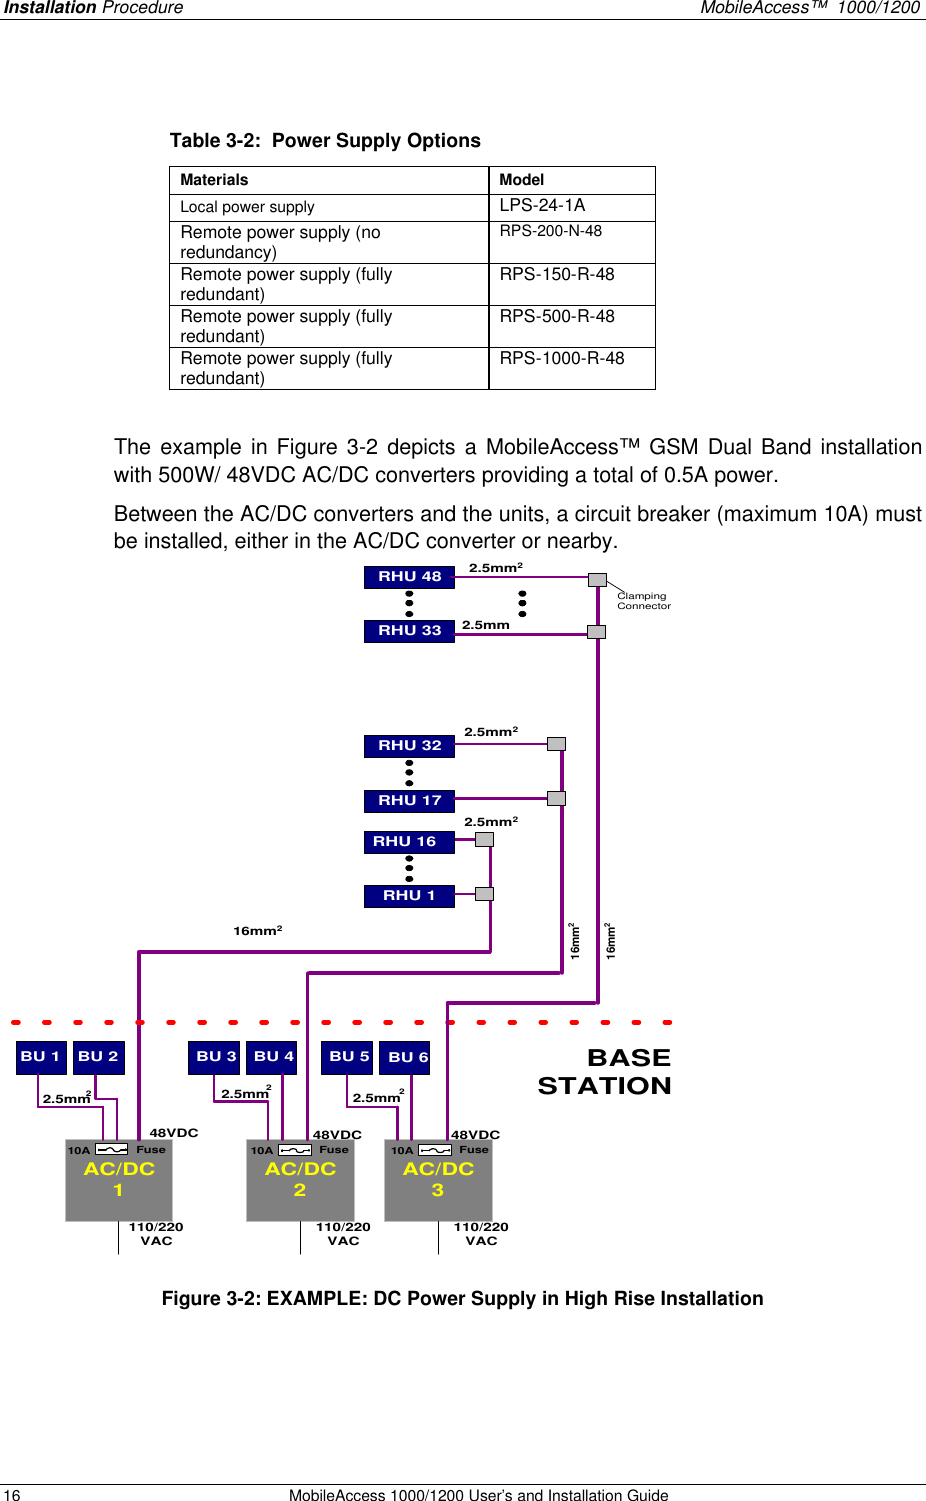 Installation Procedure    MobileAccess™  1000/1200 16 MobileAccess 1000/1200 User’s and Installation Guide   Table 3-2:  Power Supply Options Materials Model Local power supply LPS-24-1A Remote power supply (no redundancy) RPS-200-N-48 Remote power supply (fully redundant) RPS-150-R-48 Remote power supply (fully redundant) RPS-500-R-48 Remote power supply (fully redundant) RPS-1000-R-48  The example in Figure 3-2 depicts a MobileAccess™ GSM Dual Band installation with 500W/ 48VDC AC/DC converters providing a total of 0.5A power. Between the AC/DC converters and the units, a circuit breaker (maximum 10A) must be installed, either in the AC/DC converter or nearby. AC/DC2AC/DC3RHU 48AC/DC1BU 448VDC 48VDC 48VDCBASESTATION2.5mm2110/220VAC 110/220VAC 110/220VACRHU 33RHU 32RHU 17RHU 16RHU 116mm22.5mm22.5mm216mm22.5mm216mm2ClampingConnectorBU 1 BU 2 BU 3 BU 6BU 52.5mmFuse10A Fuse10AFuse10A2.5mm22.5mm2  Figure 3-2: EXAMPLE: DC Power Supply in High Rise Installation   